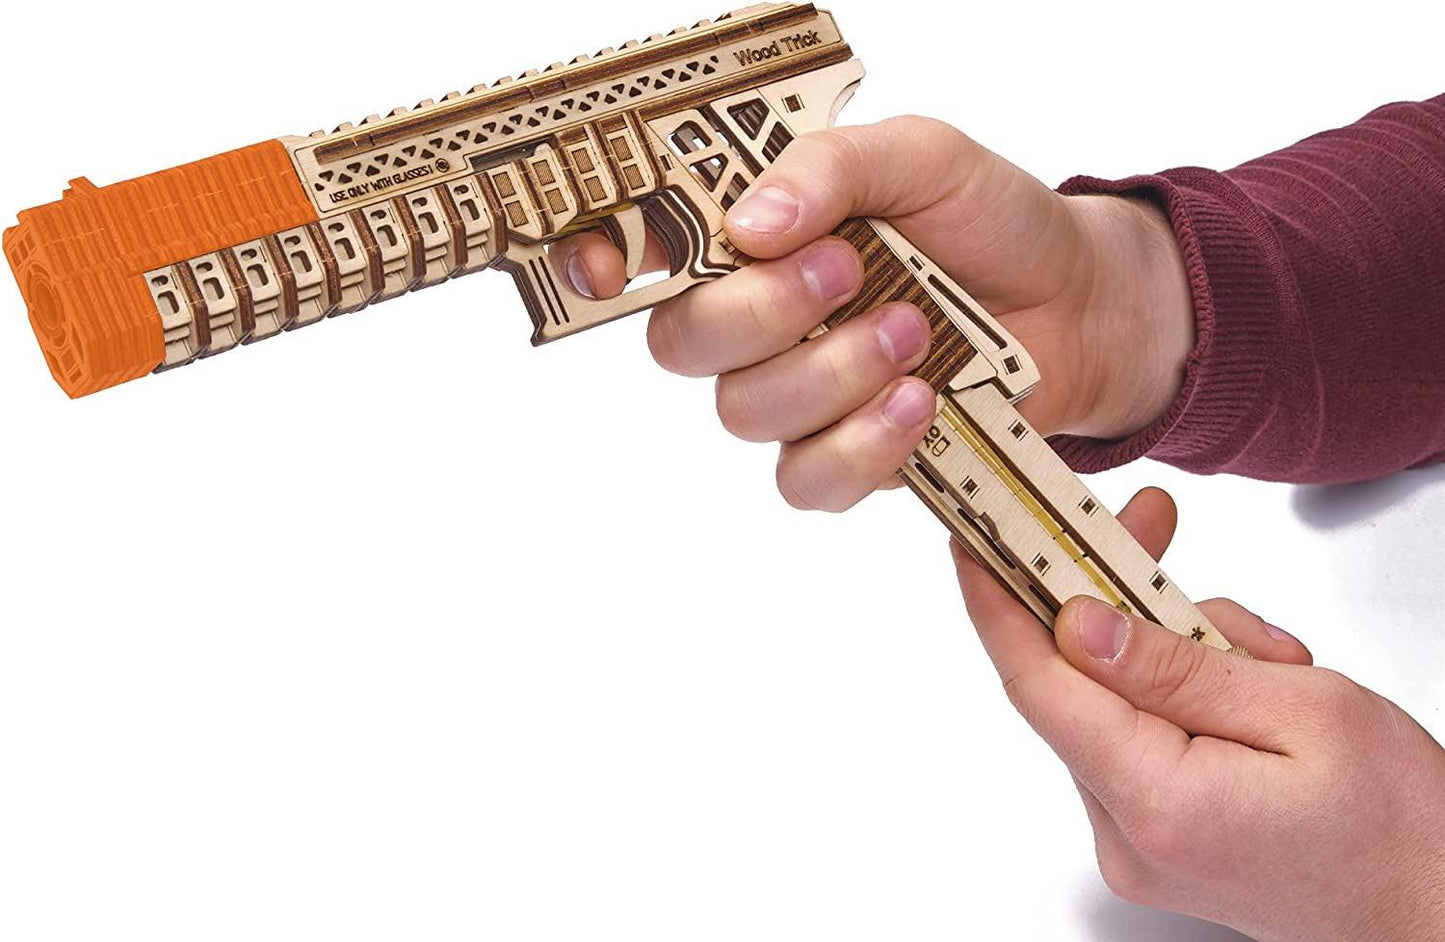 Wood Trick Defenders Gun 3D Wooden Puzzles for Adults and Kids to Build - Shoots up to 13 Ft - 2 Clips - 9X5 in - WoodArtSupply